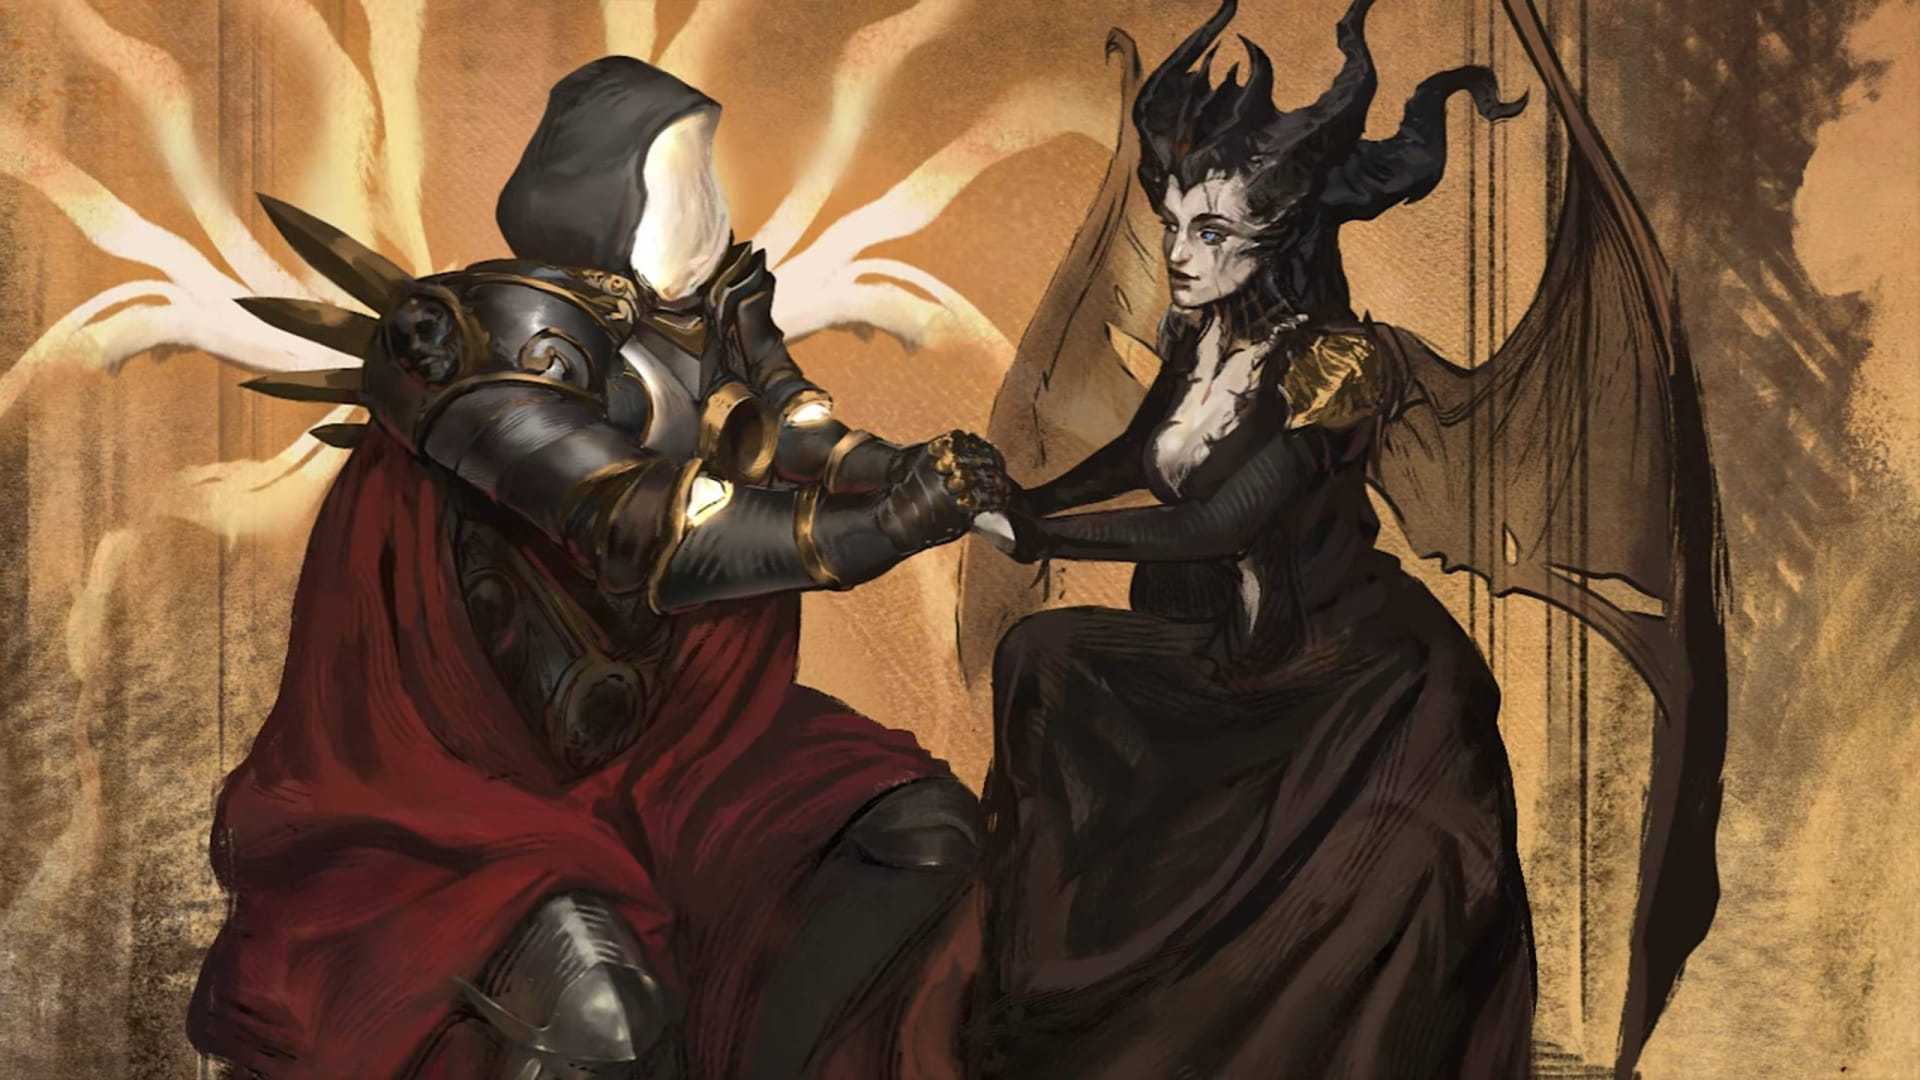 Diablo IV Lore Video Tells the Tale of the Creation of Sanctuary by Inarius & Lilith